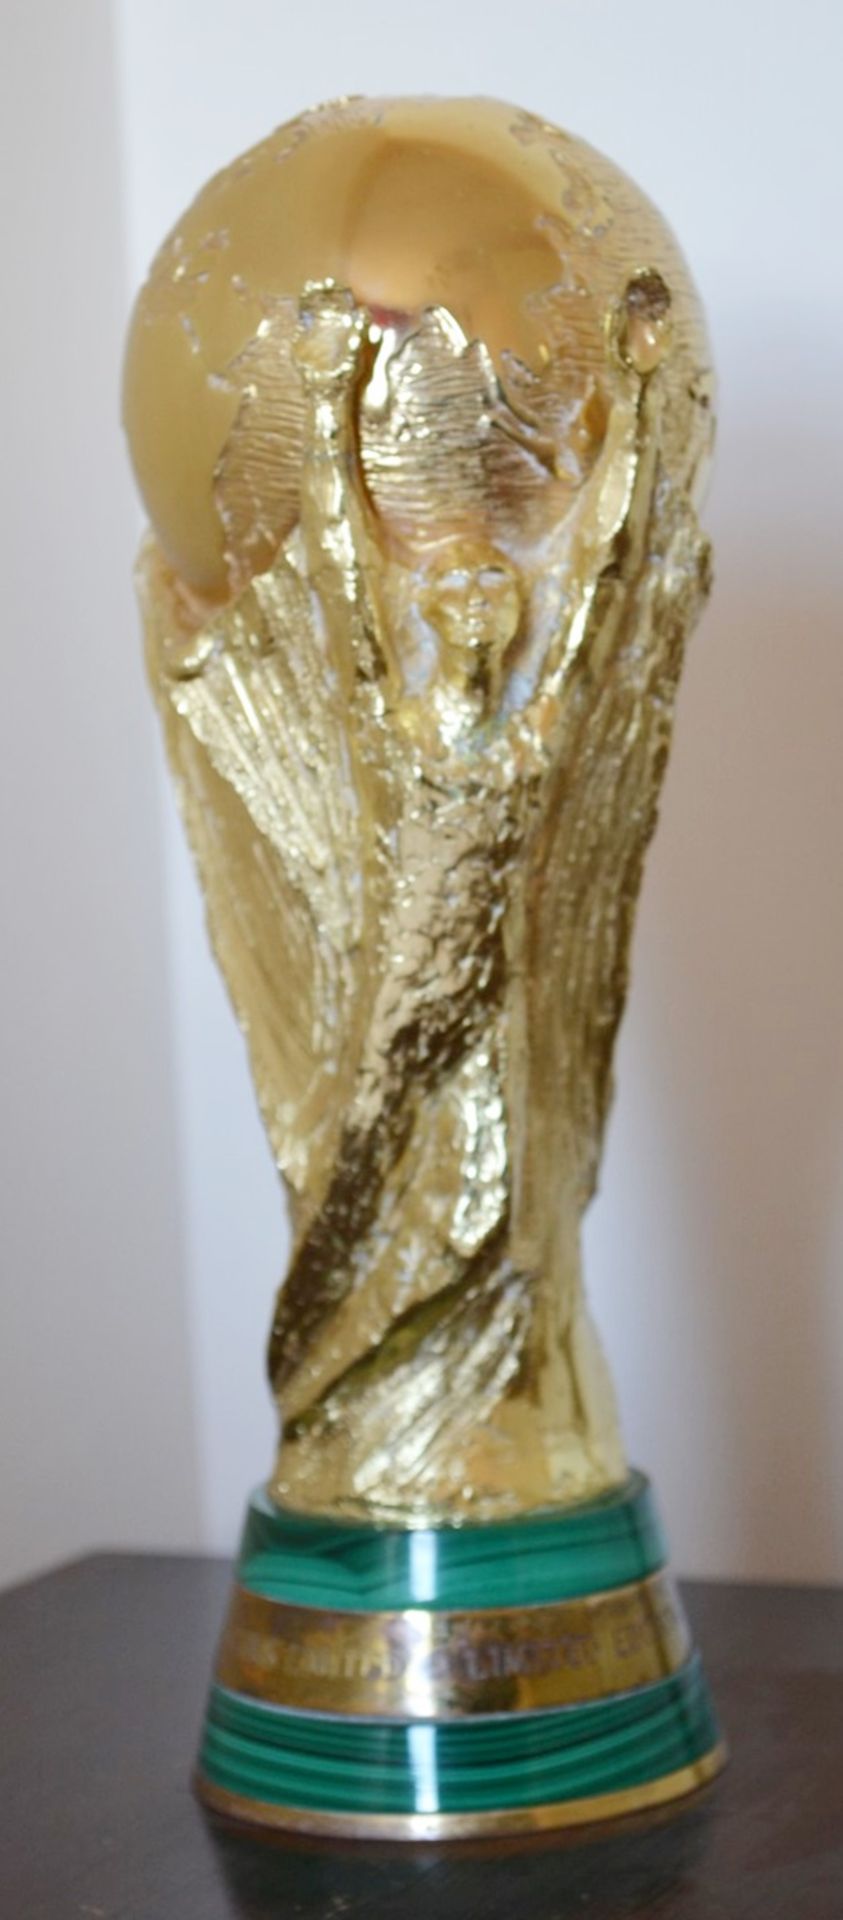 1 x Official World Cup 1:1.3 Scale 27cm Replica By Gerrard & Co. - Gold Plated - No.8 Of Only 10 - Image 12 of 16